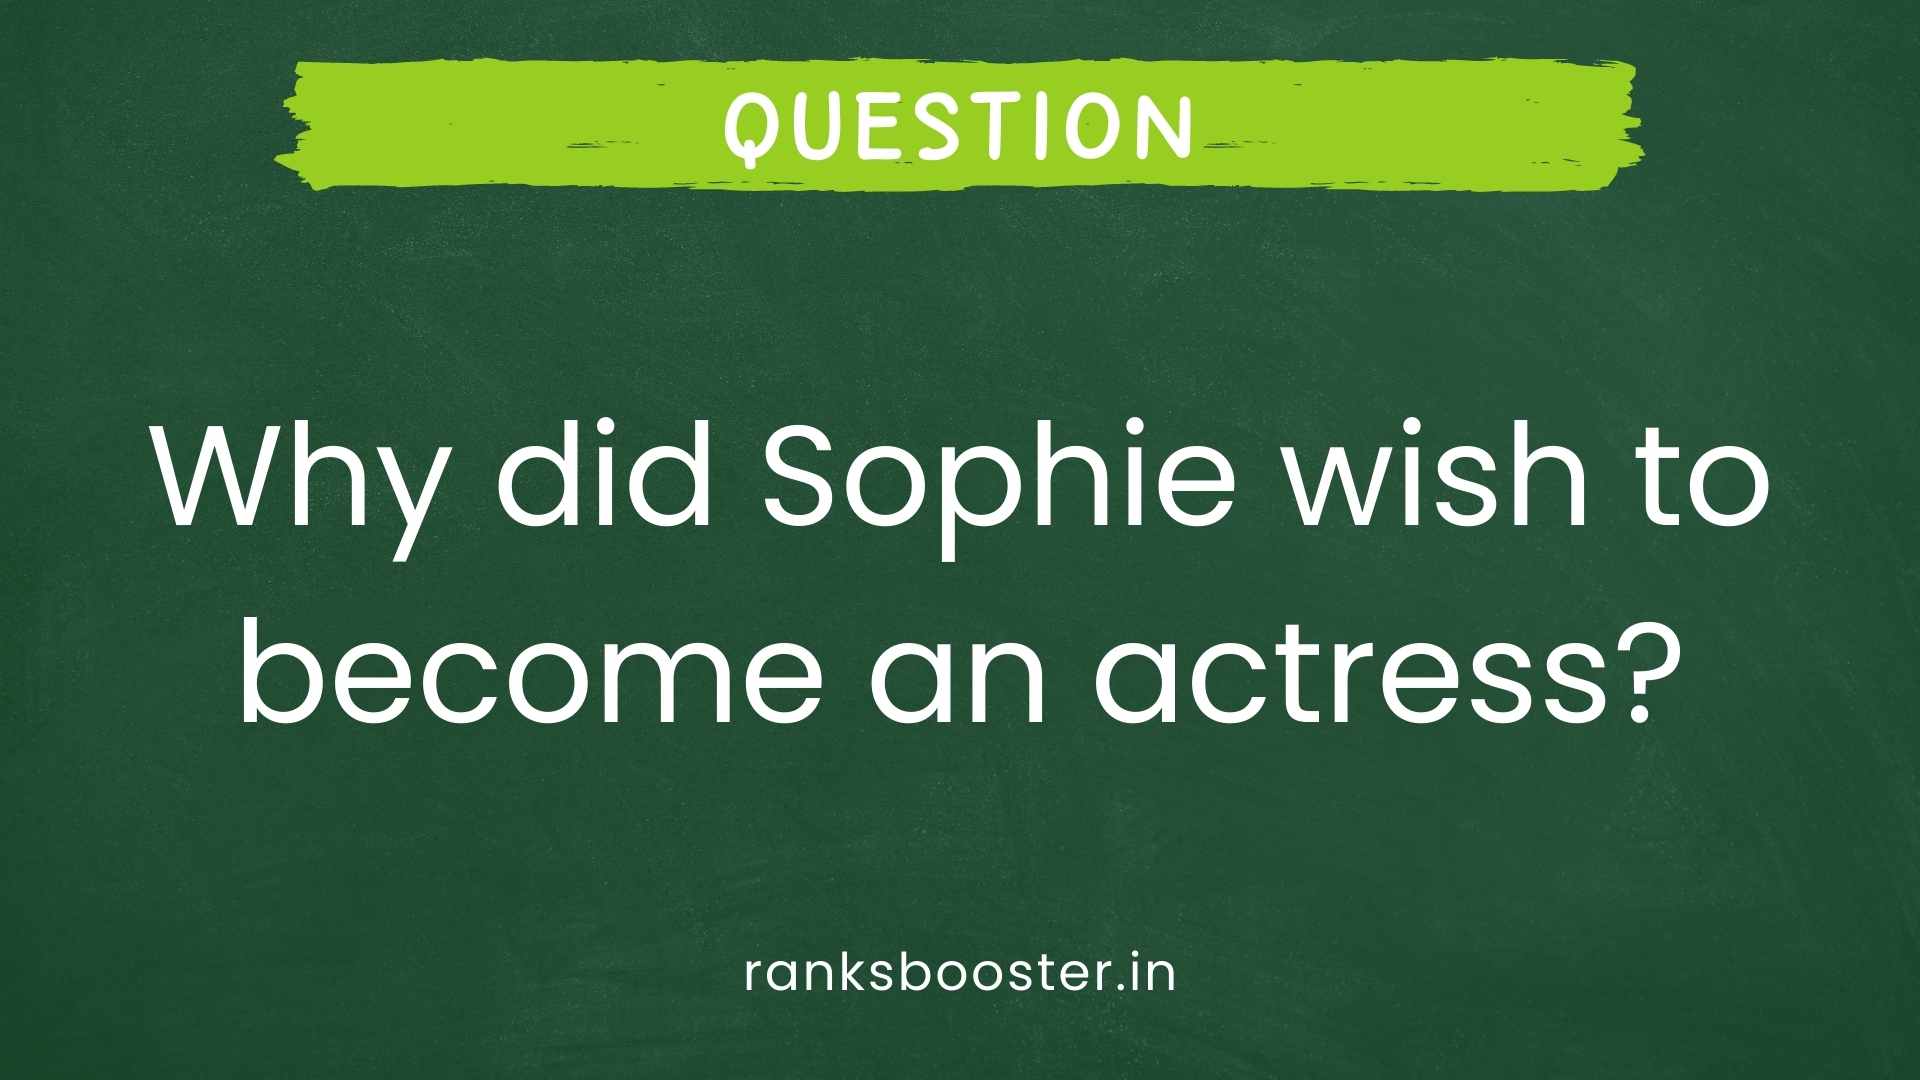 Question: Why did Sophie wish to become an actress?